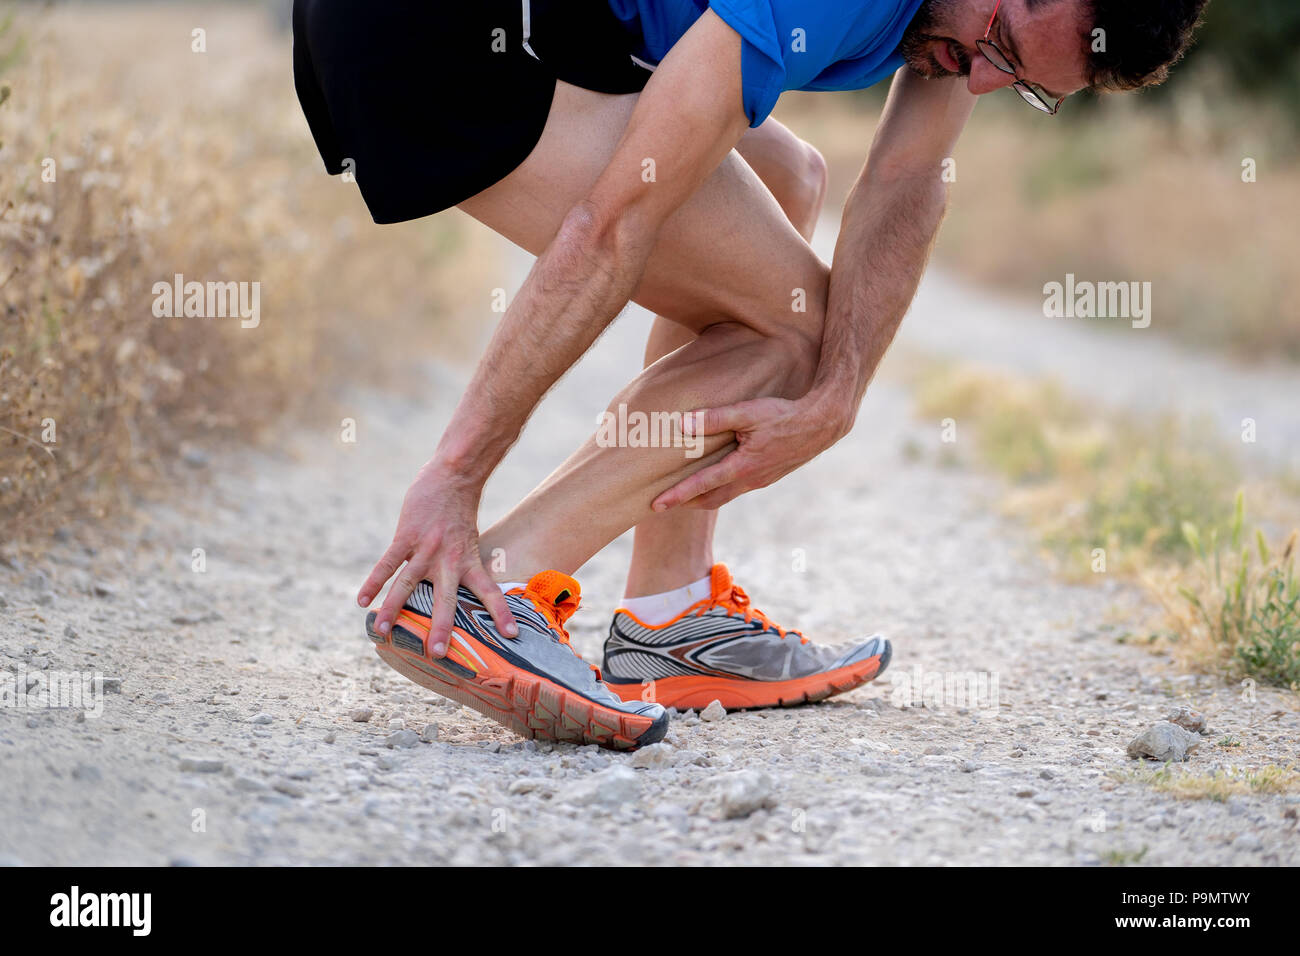 close up of runner touching painful twisted or broken ankle shin or calf athlete runner training accident sport running ankle sprain concept Stock Photo